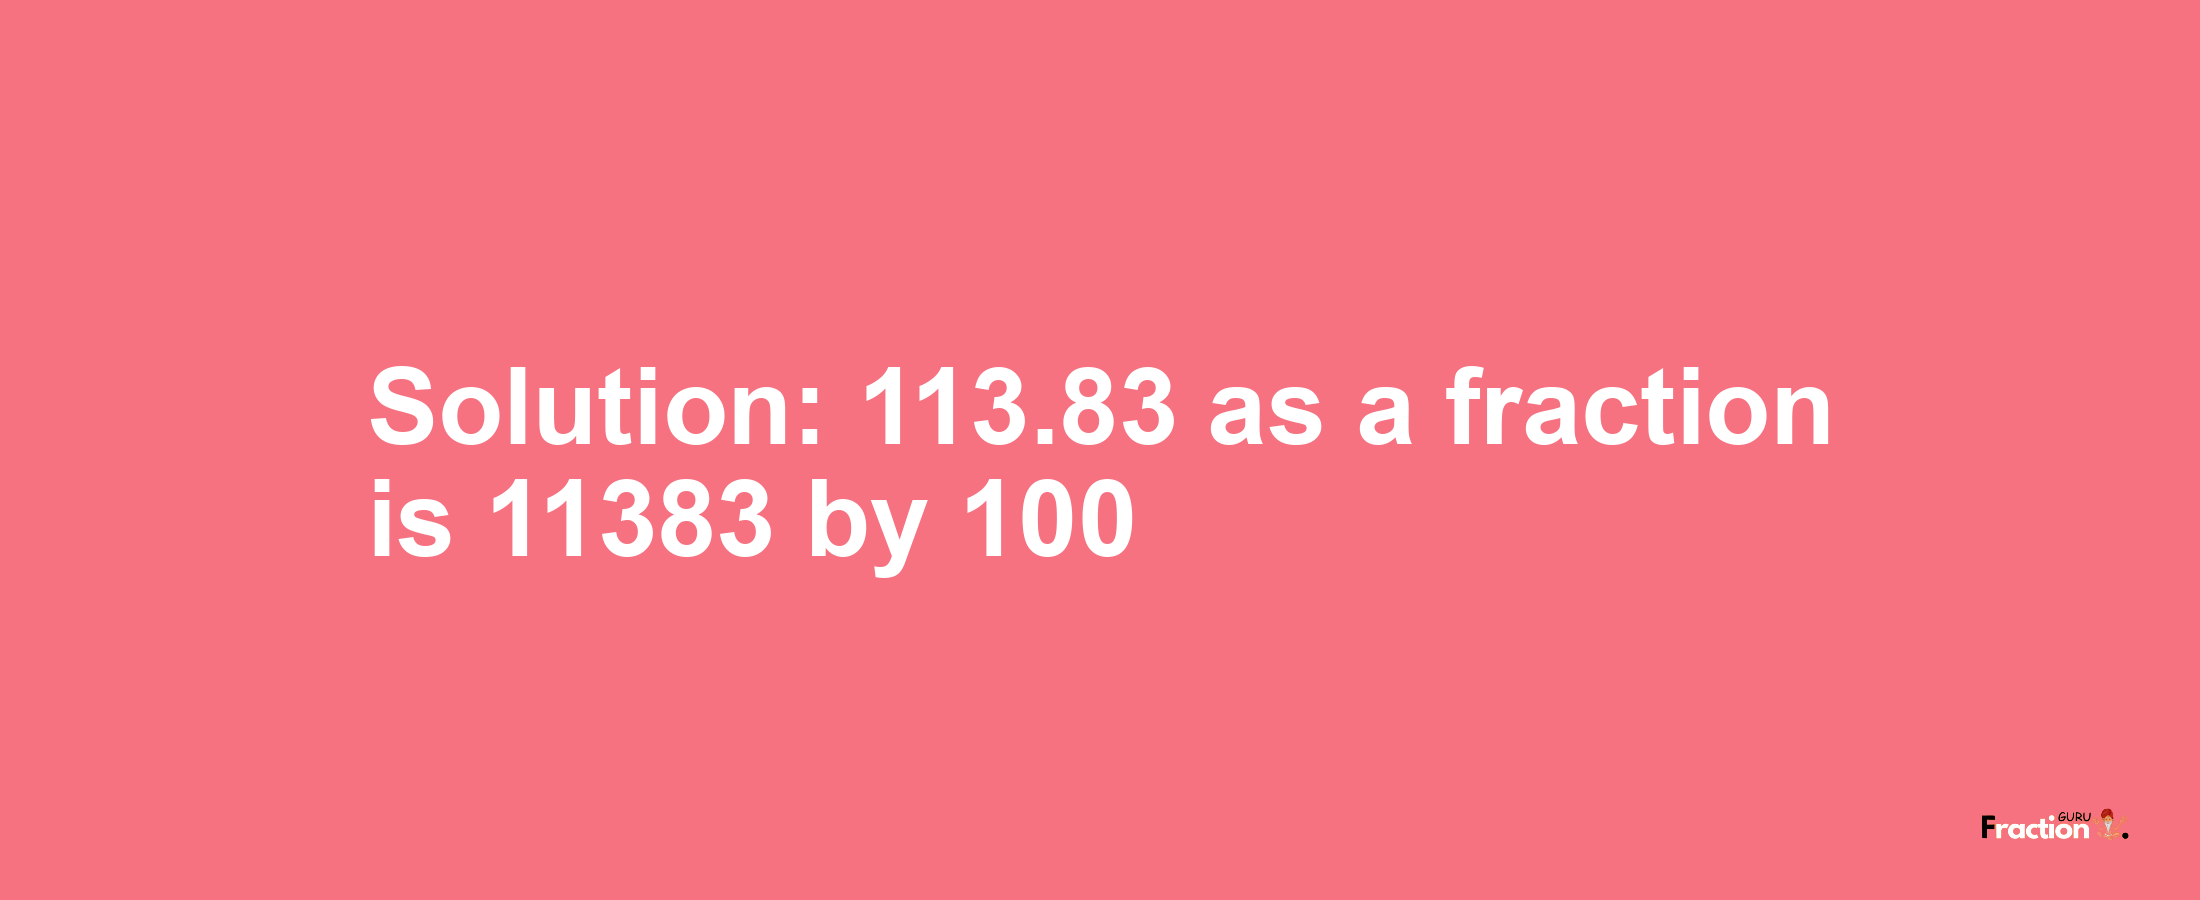 Solution:113.83 as a fraction is 11383/100